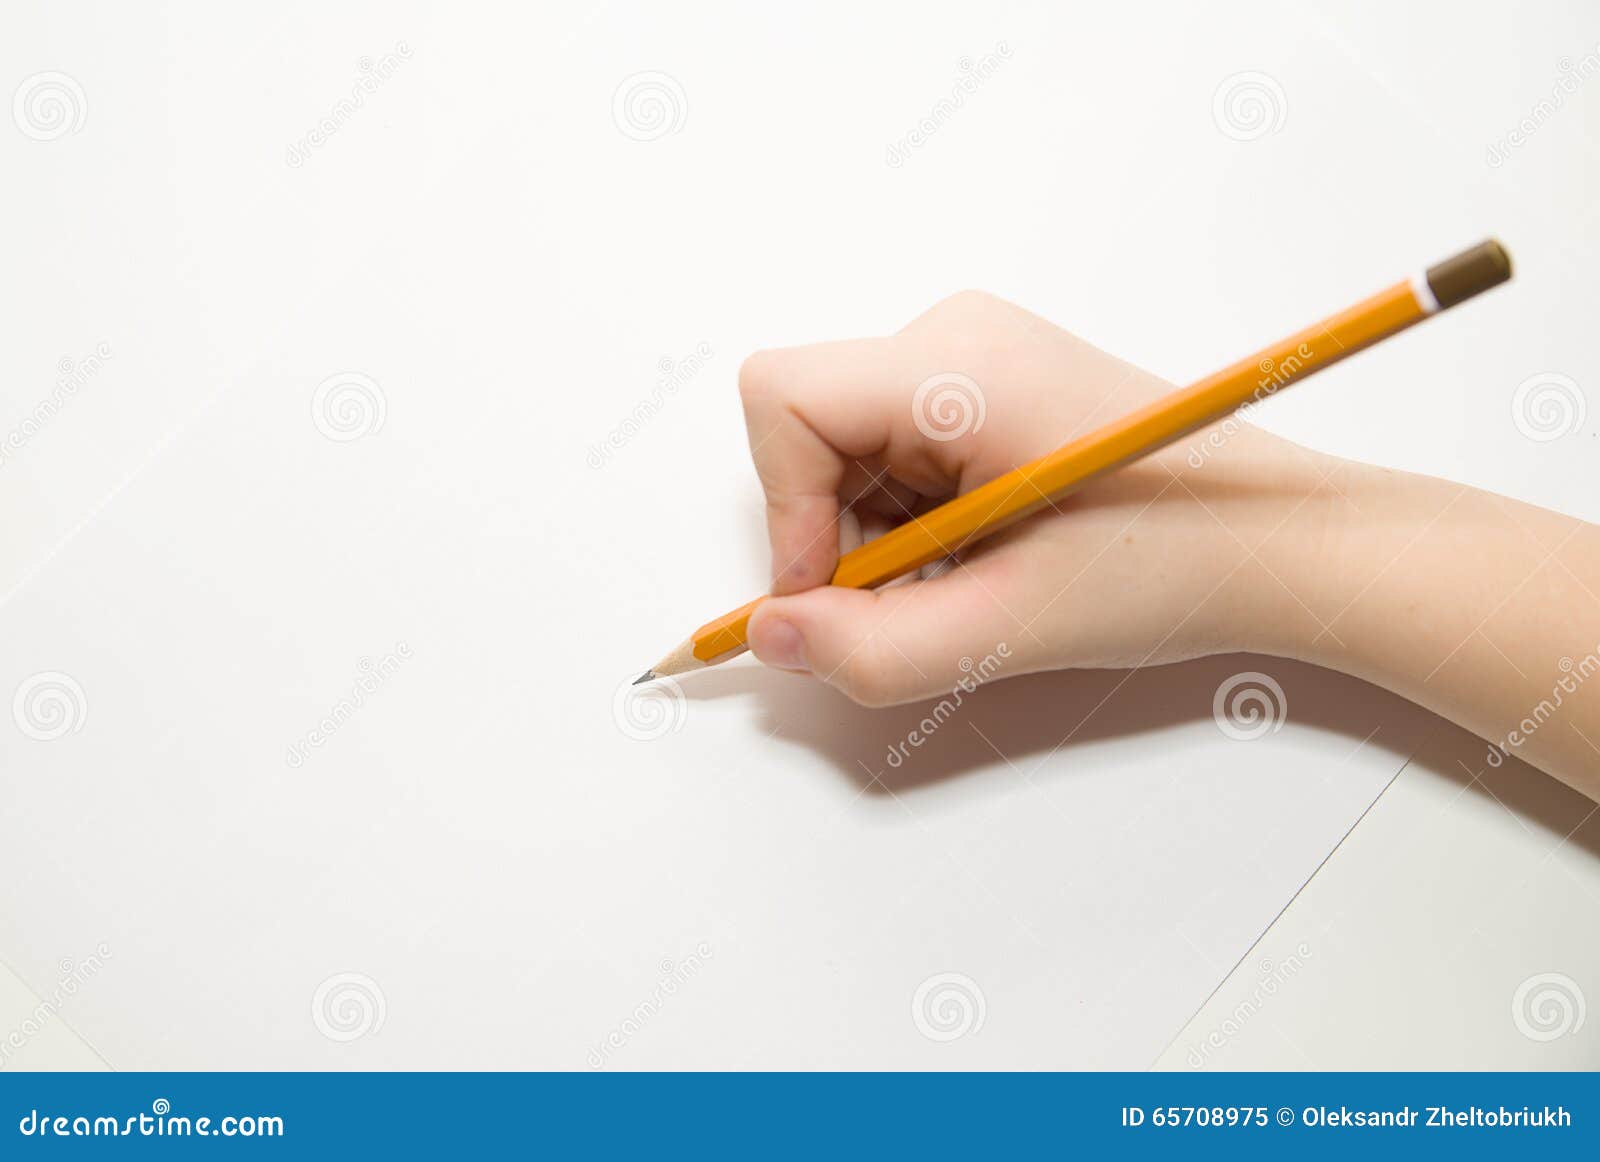 kid's right hand holding a pencil on over white